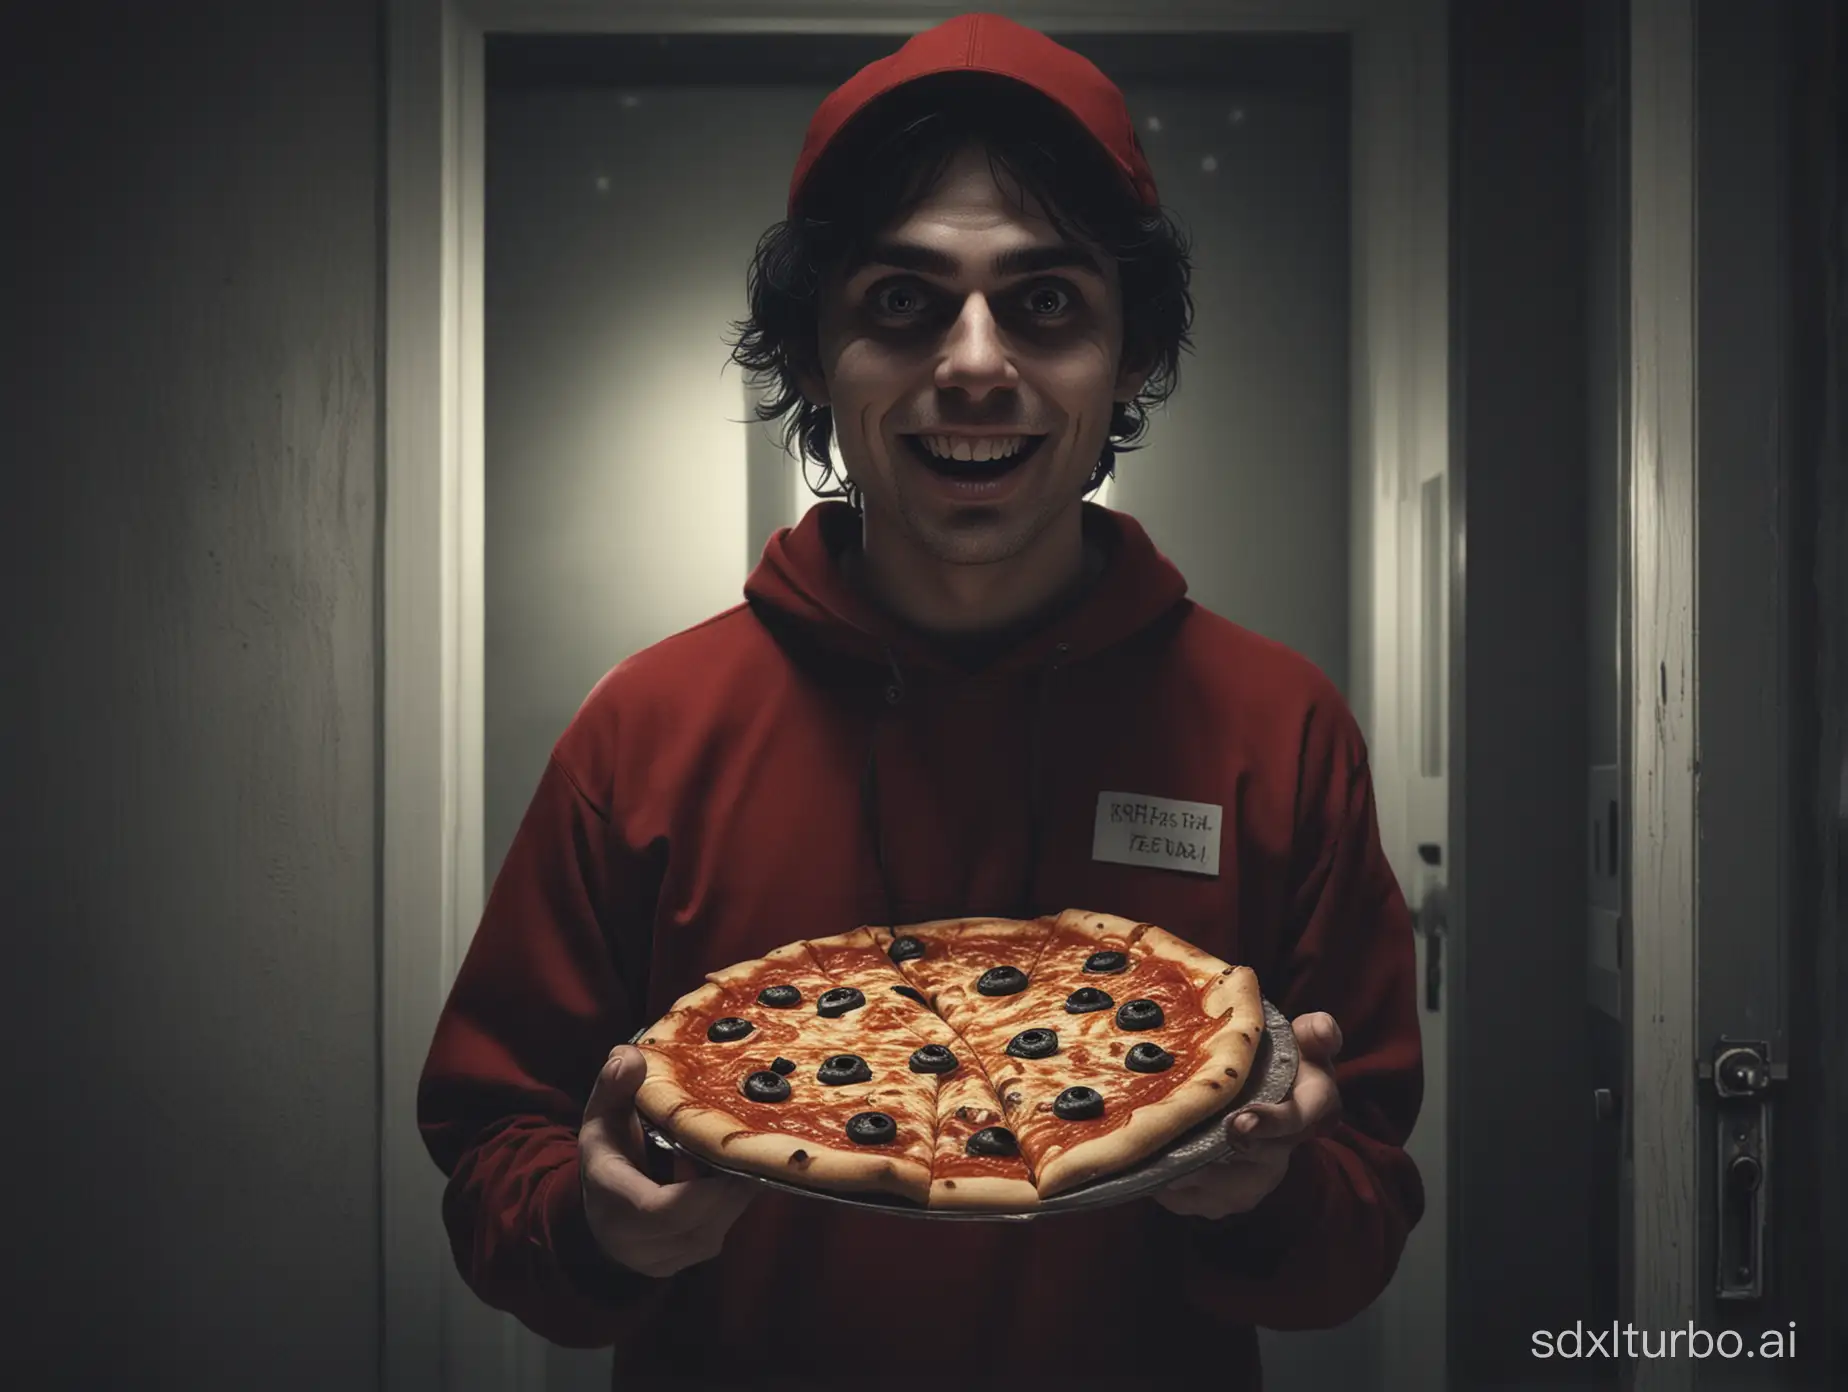 Terrifying-Encounters-True-Pizza-Delivery-Horrors-Unveiled